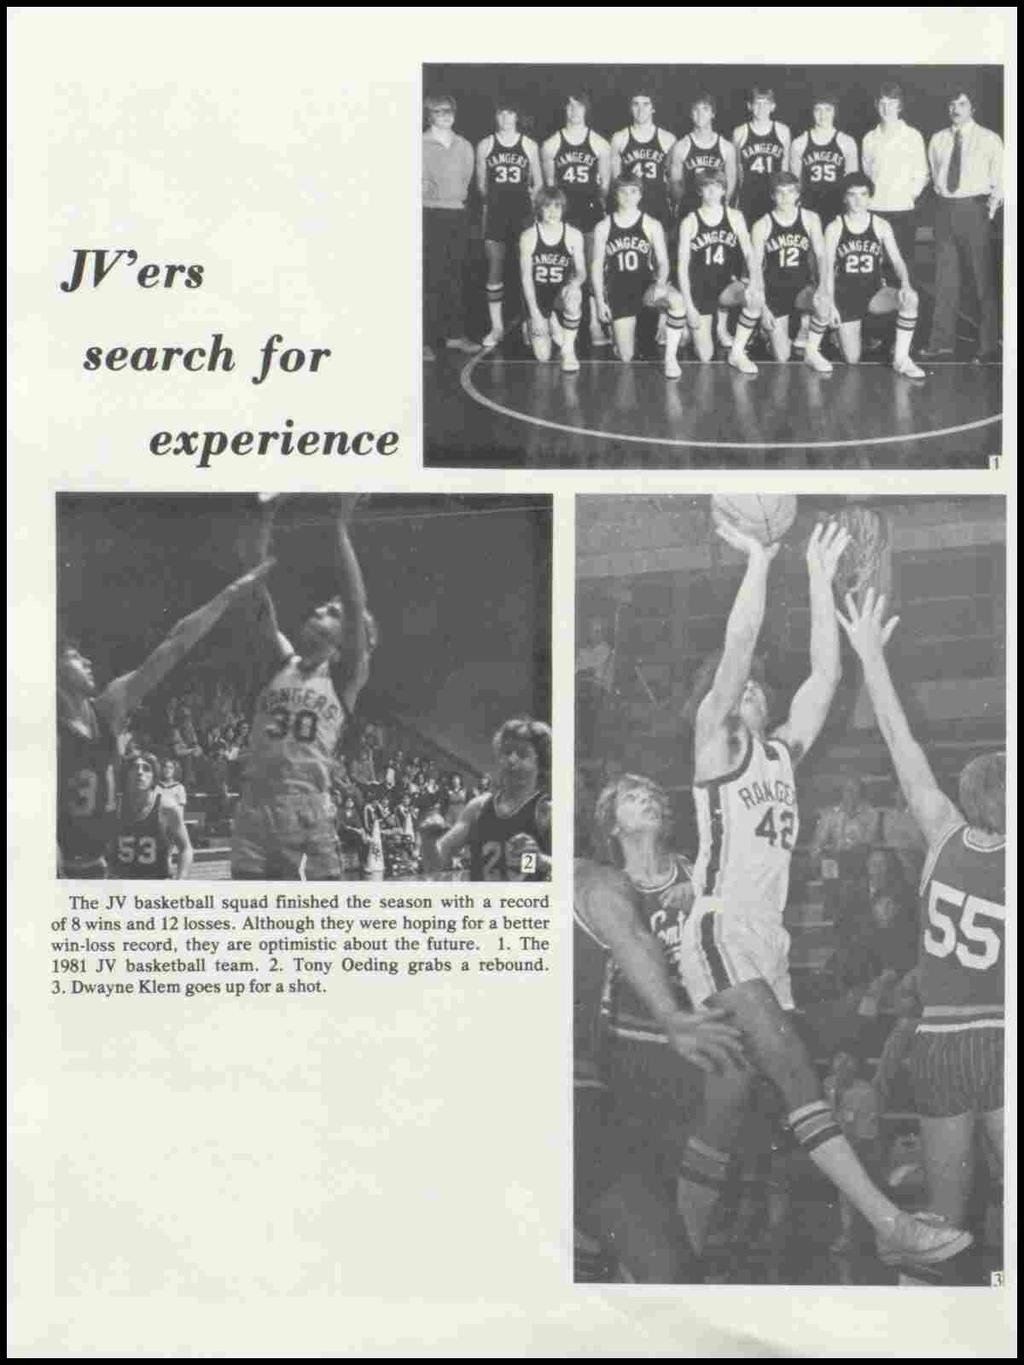 ]V'ers search for experience The JV basketball squad finished the season with a record of 8 wins and 12losses.